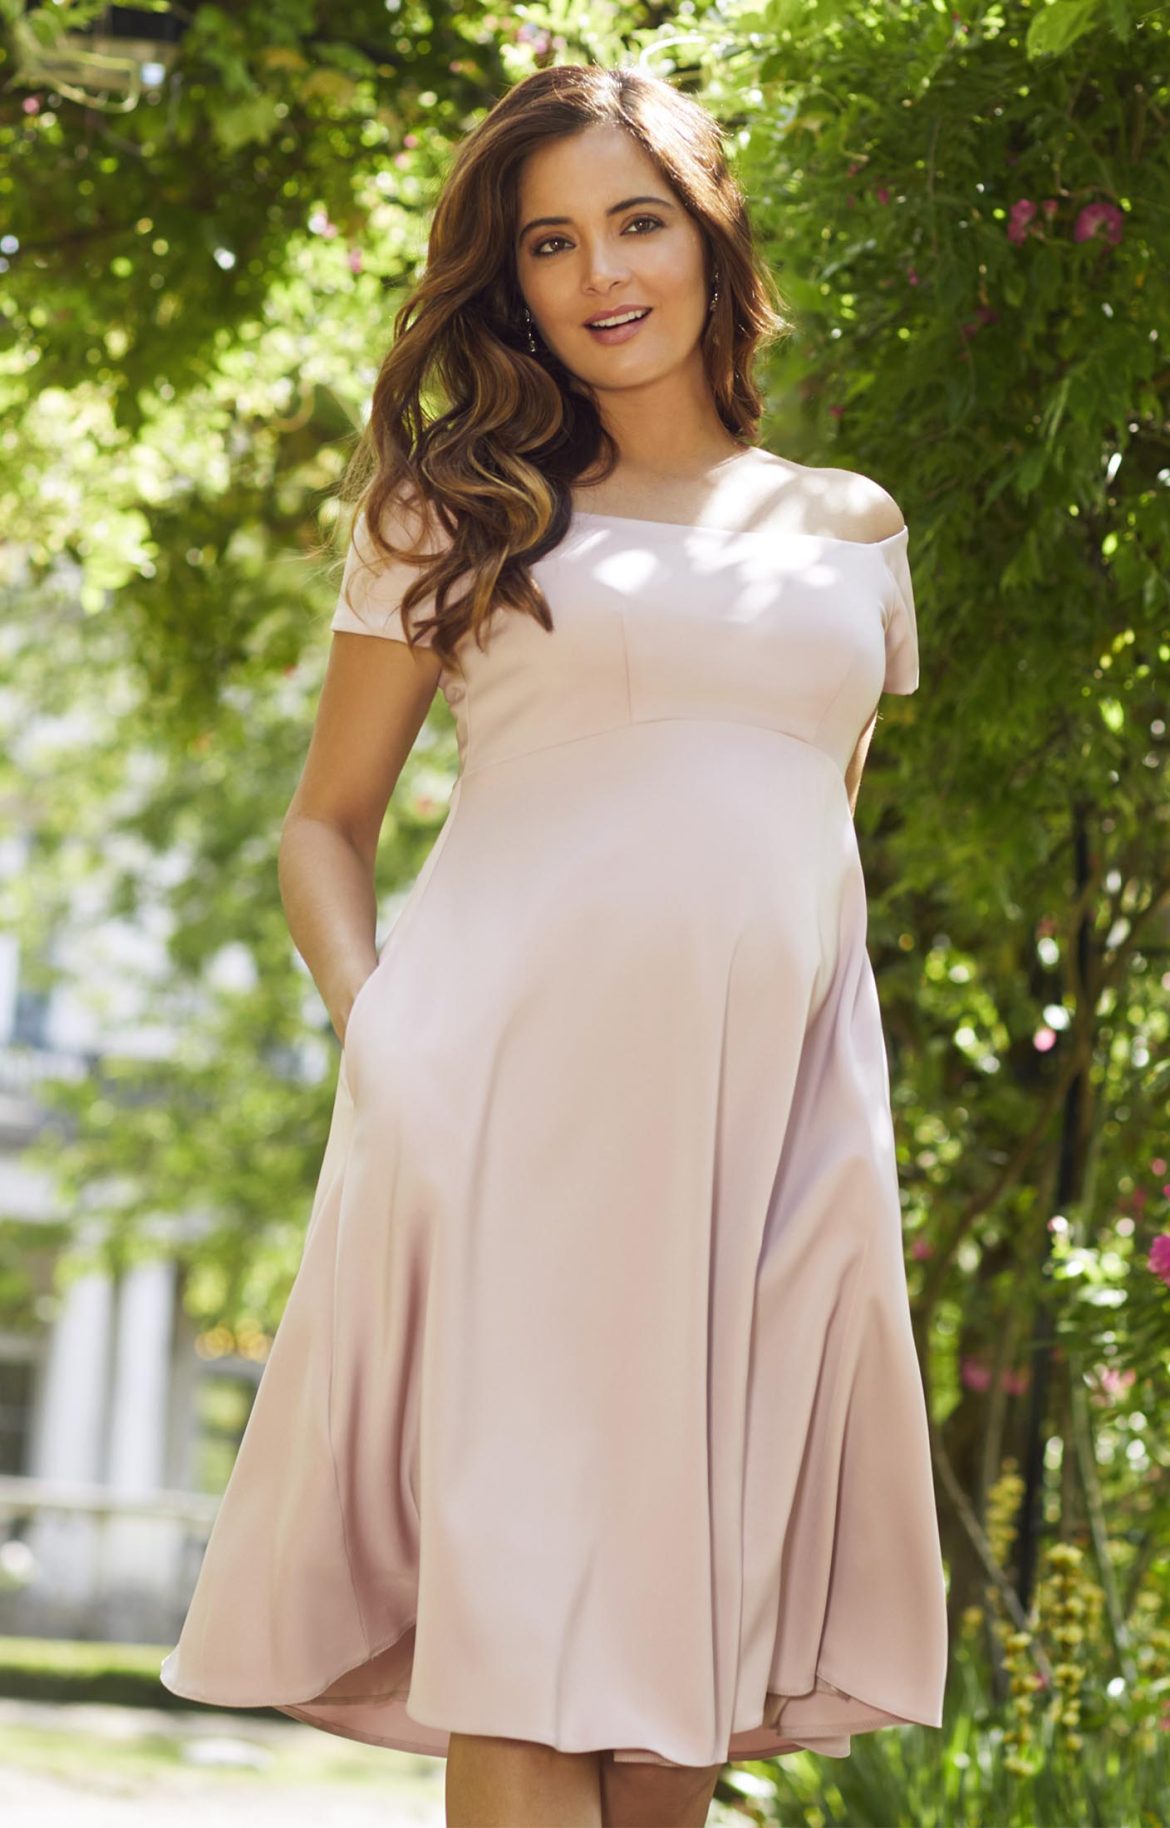 “From Baby Showers to Date Nights: Stylish Maternity Dress Ideas”